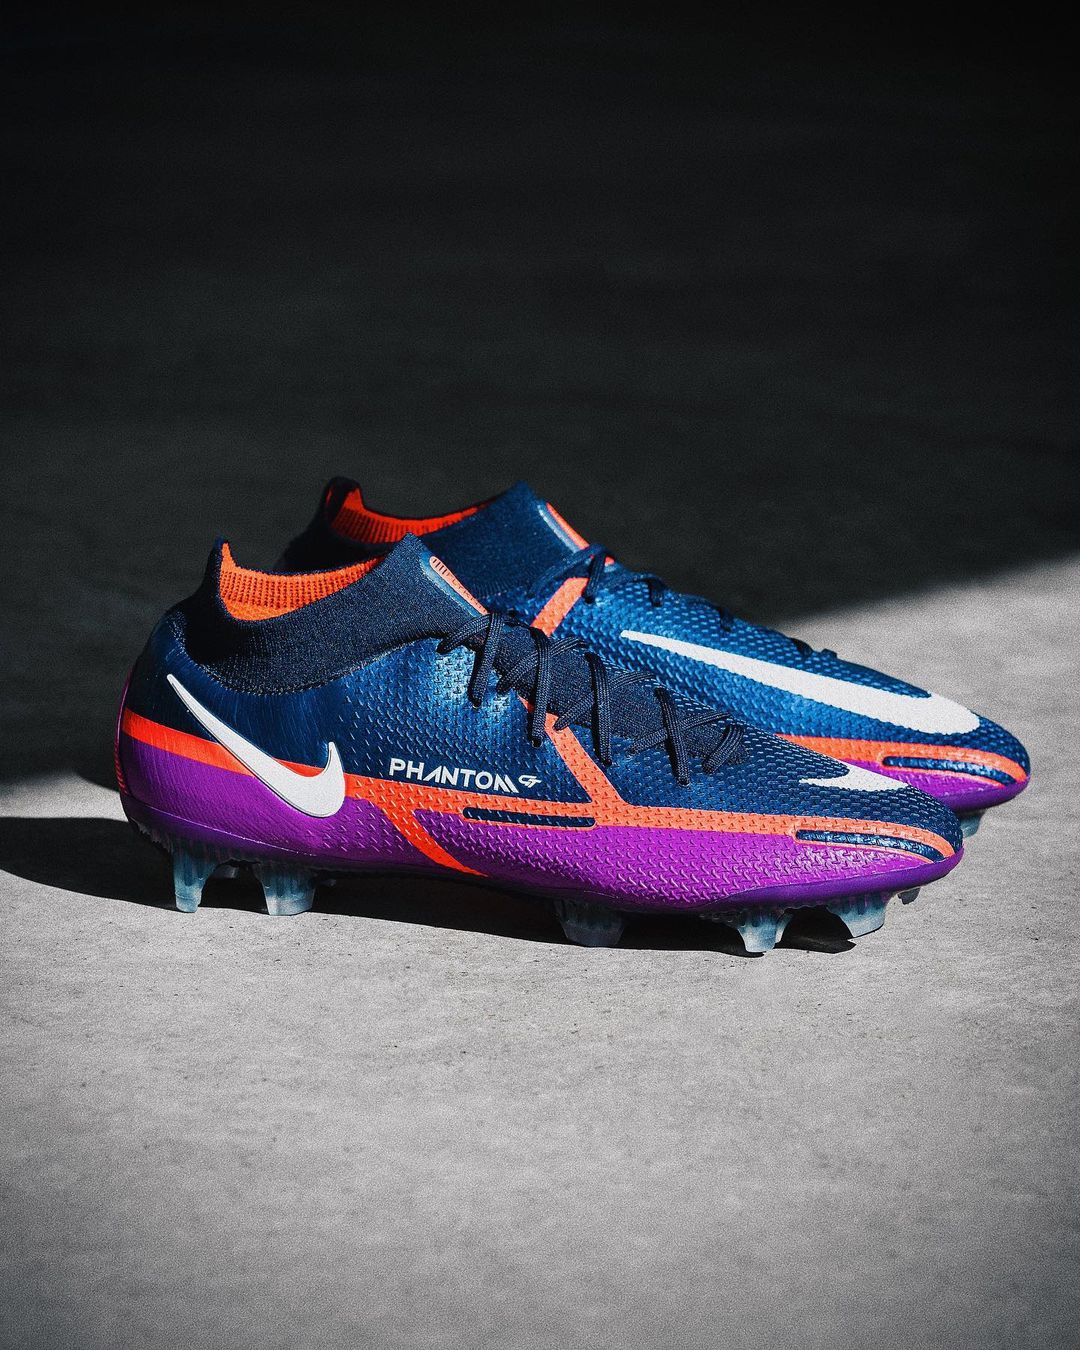 Pro:Direct Soccer US on Twitter: "Show your next-gen skills with the new Nike GT II UV 🔥 Available now at Pro:Direct Soccer US 📲 Shop here 🛒 https://t.co/r6Of5hbnfQ https://t.co/wnqzIbM3Jw" / Twitter